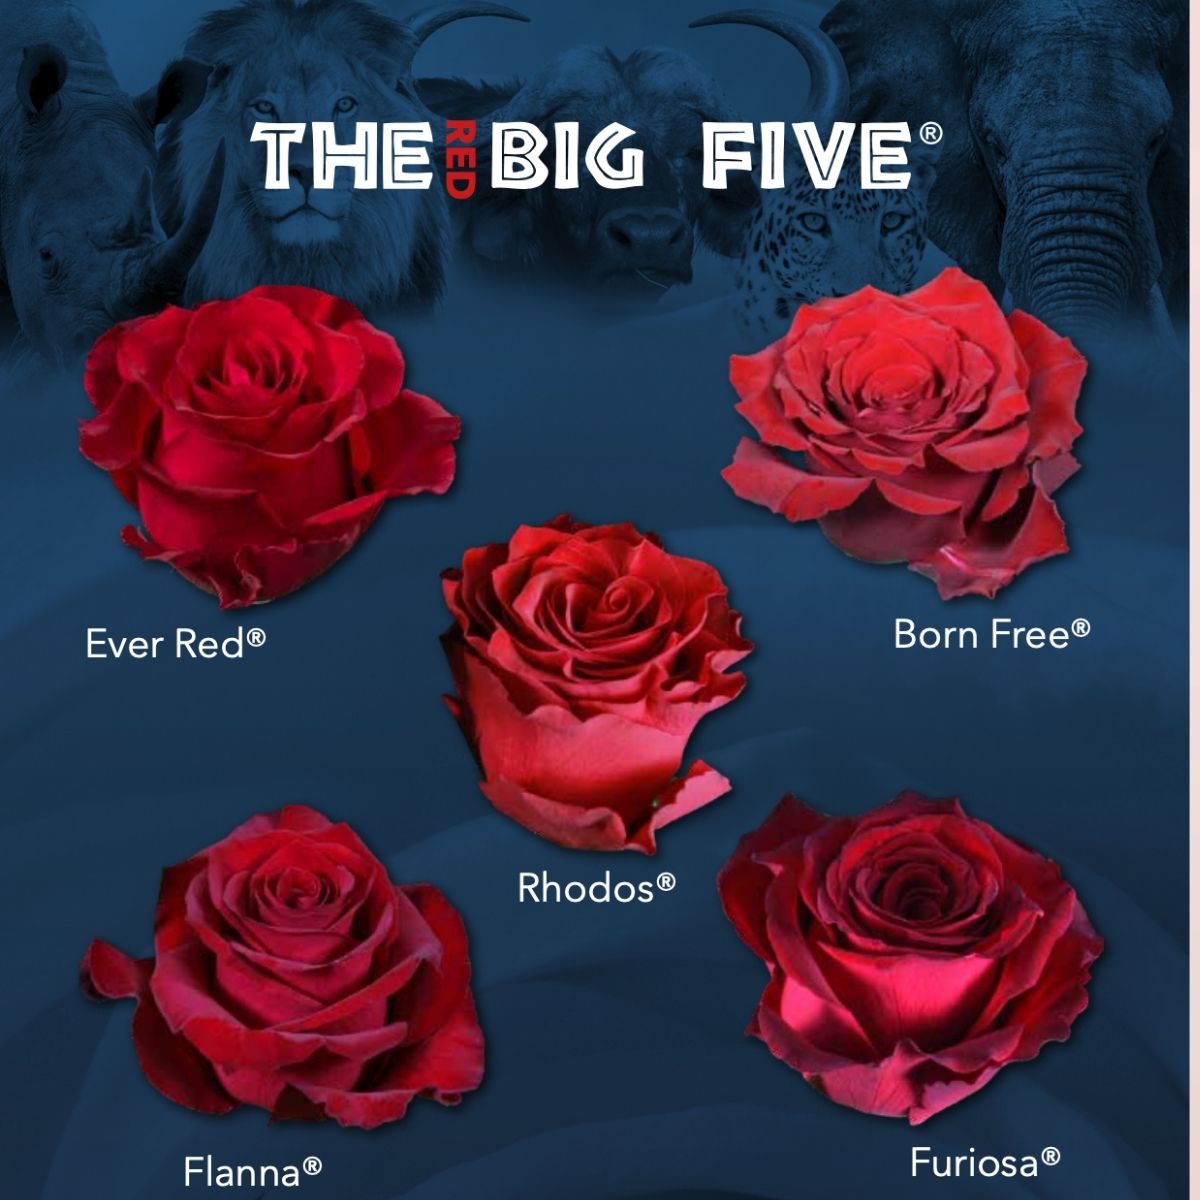 the-big-five-rose-edition-part-1-red-roses-featured